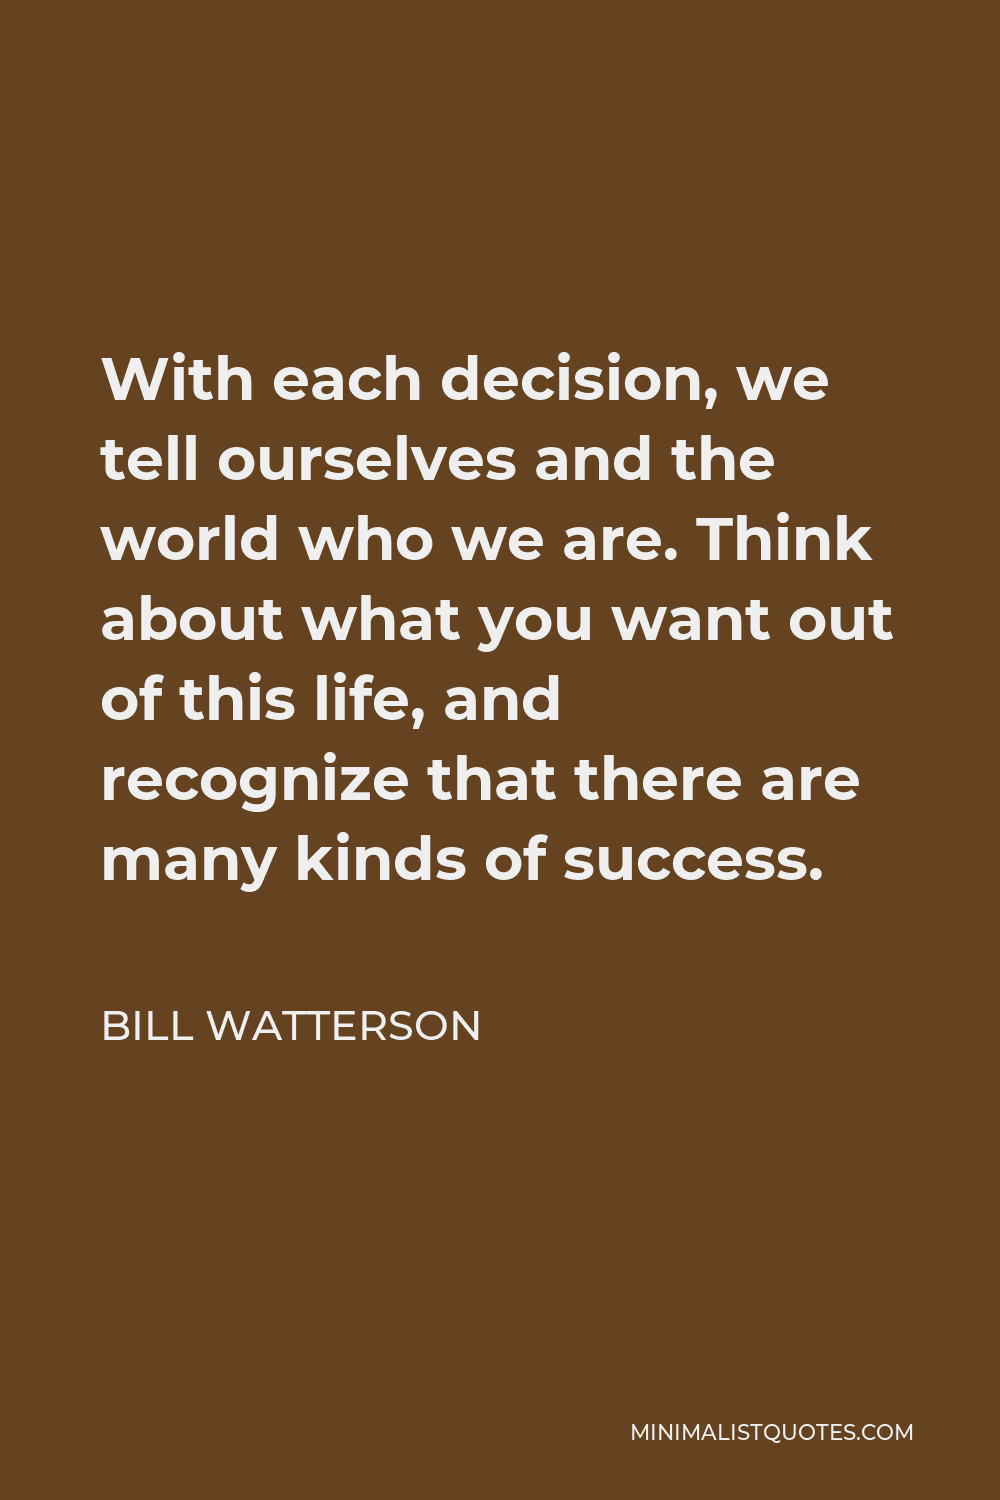 Bill Watterson Quote - With each decision, we tell ourselves and the world who we are. Think about what you want out of this life, and recognize that there are many kinds of success.